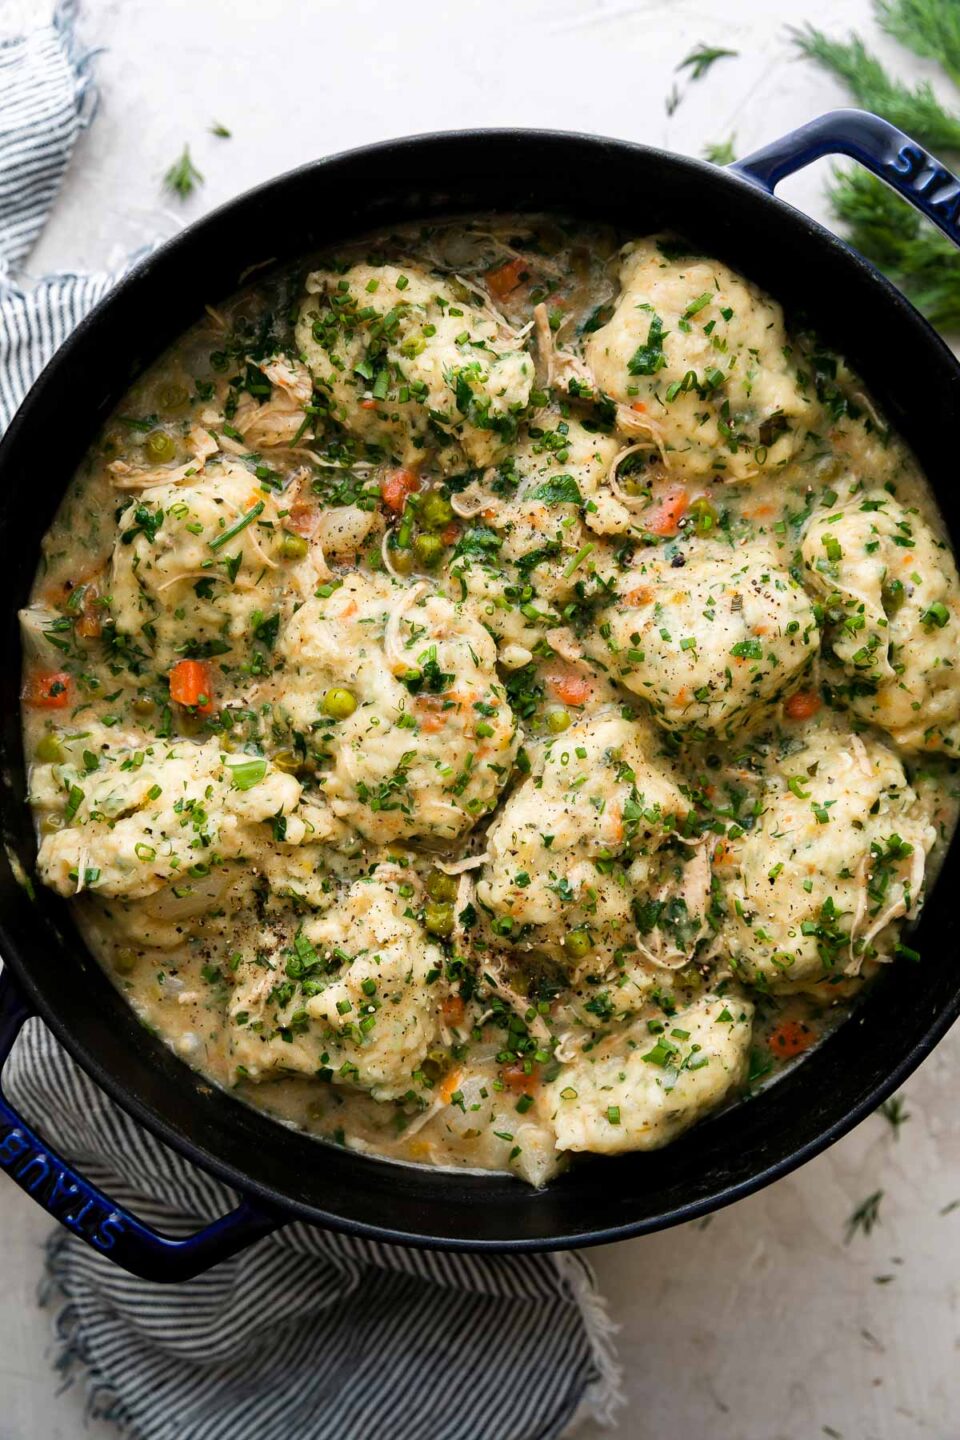 Finished spring chicken and dumplings fill a dark blue Staub cocotte. The cocotte sits atop a creamy white textured surface and is surrounded by a blue and white striped linen napkin and fresh herbs.